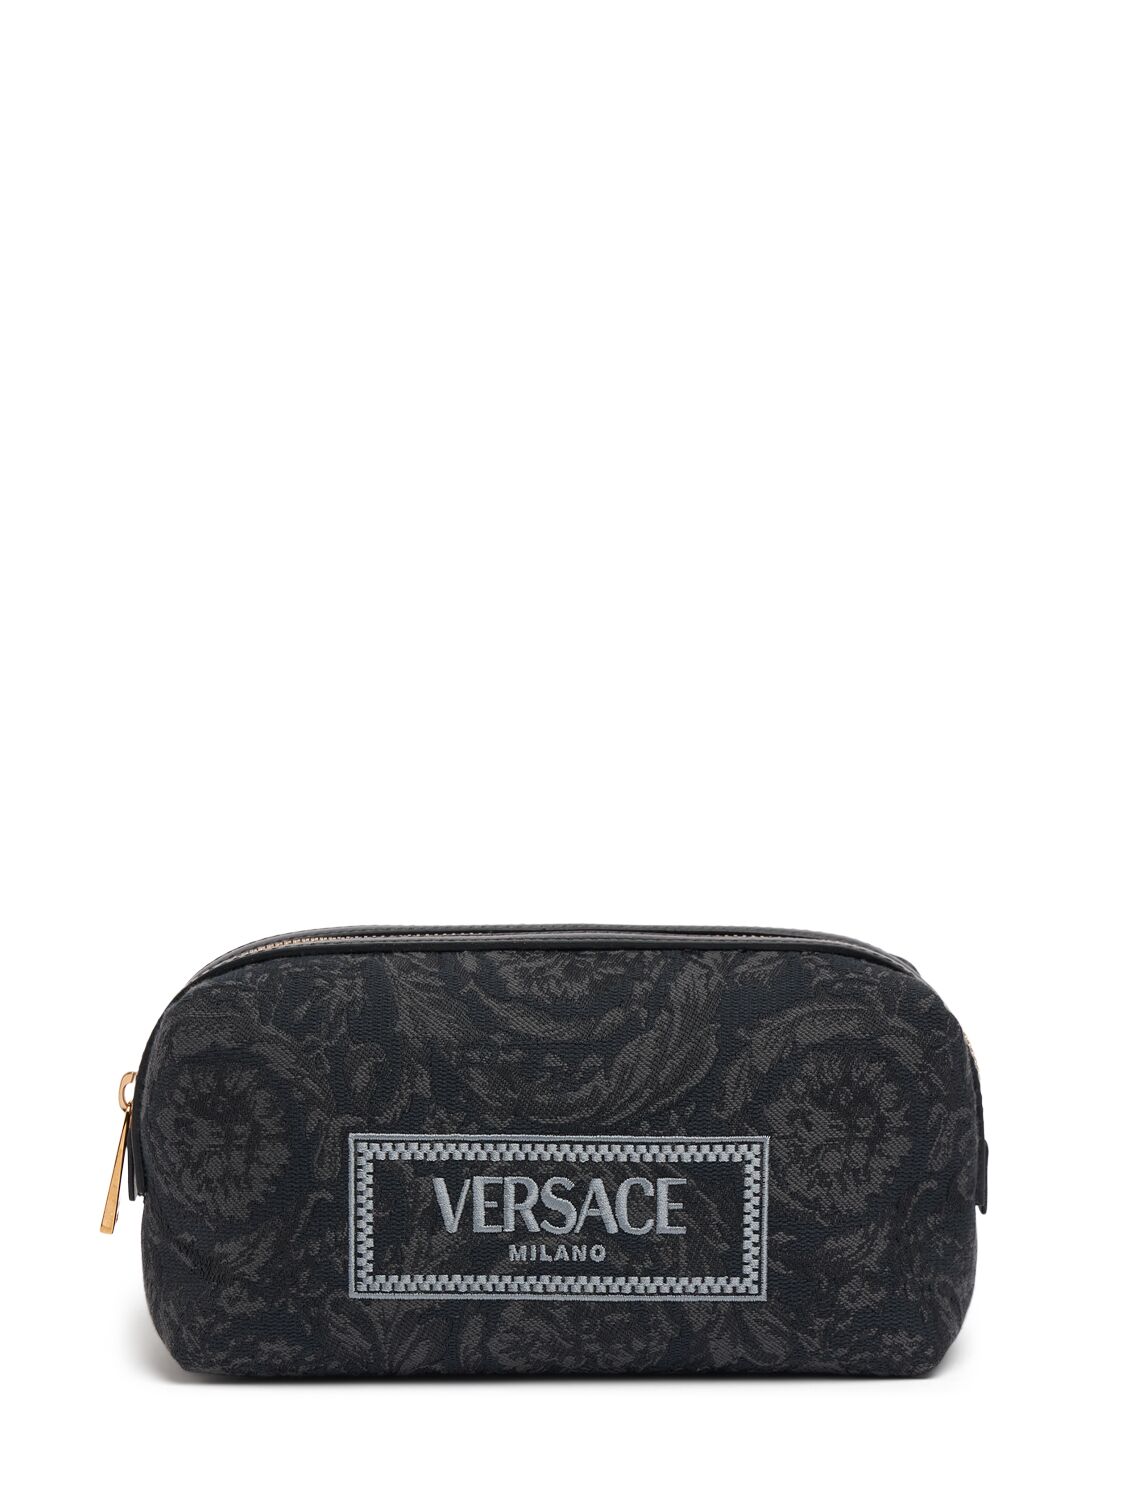 Versace Barocco Embroidery Jacquard Beauty Pouch In Black